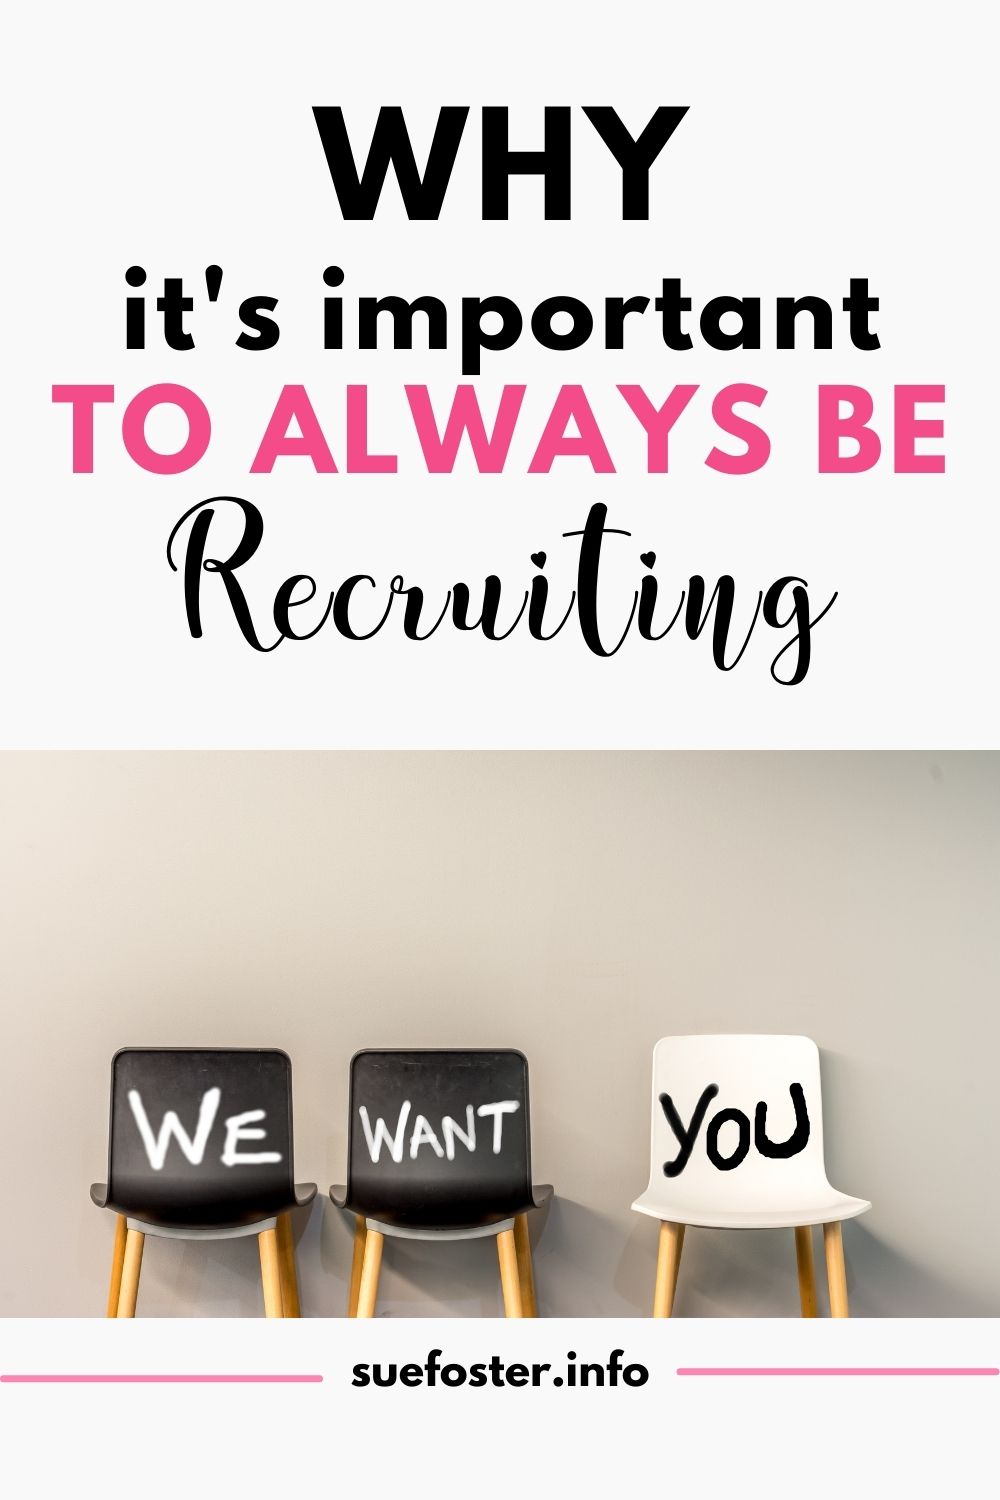 Always recruiting the best employees is important, and here's how you can recruit the best ones for your business.